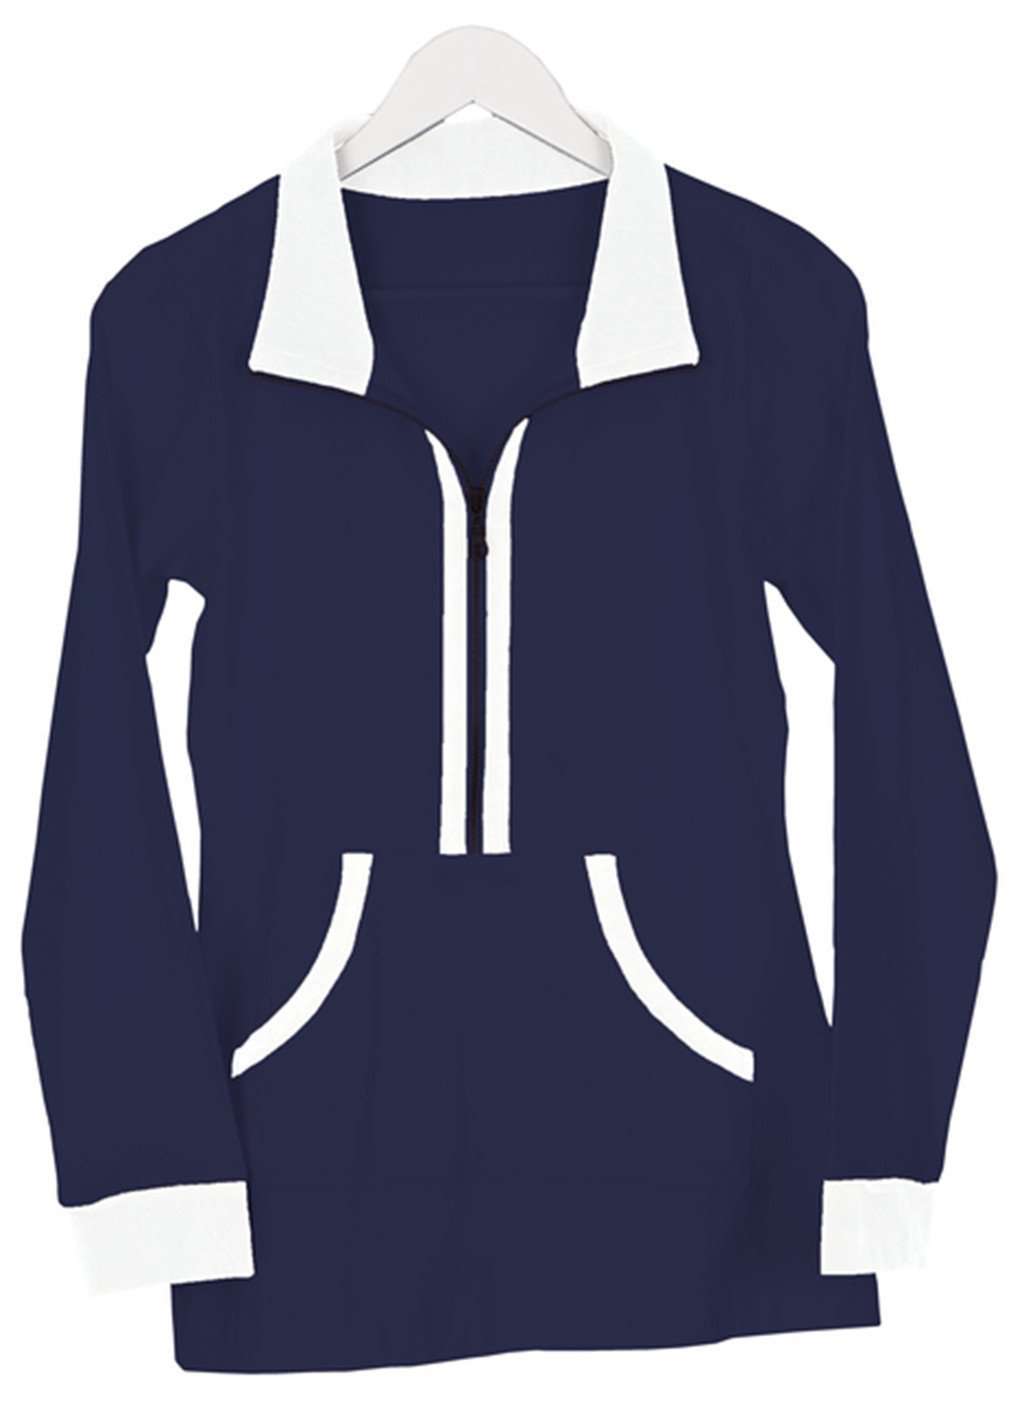 Polly Pullover in Navy and White Stripe by Duffield Lane - Country Club Prep